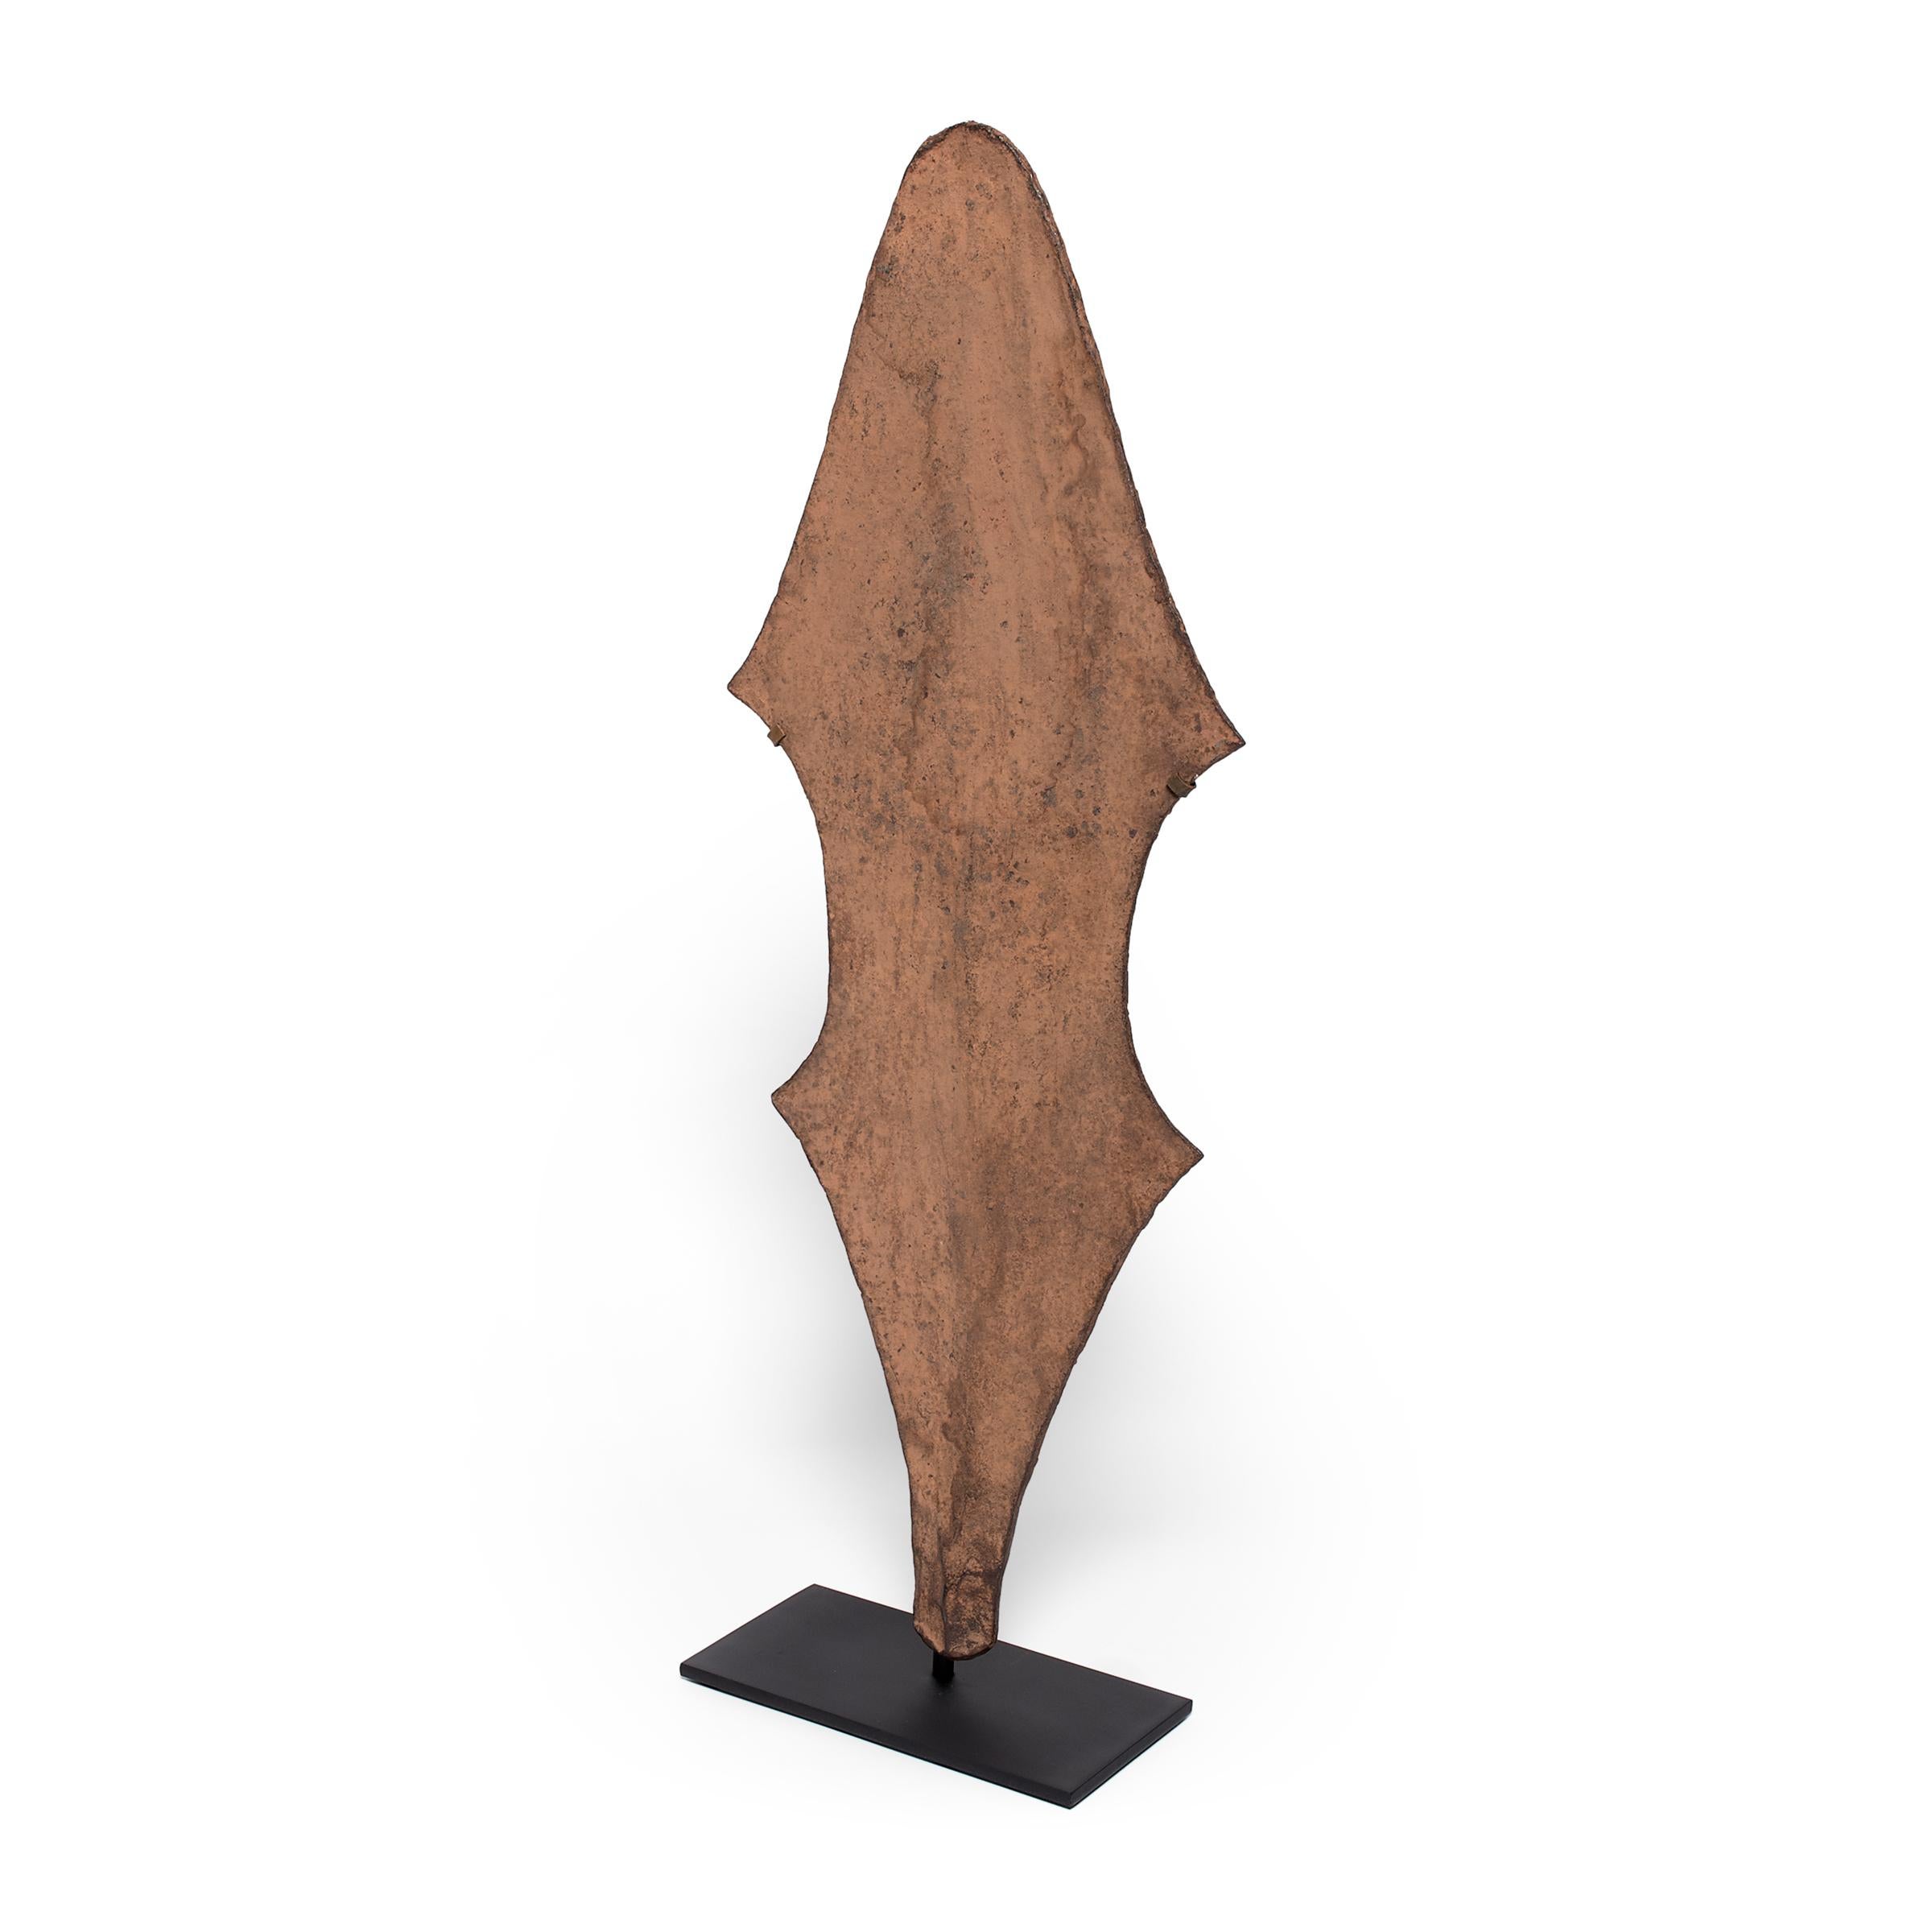 In many pre-colonial regions of Africa, iron was so valuable that tools often doubled as currencies for rare but significant transactions. This large iron form is a currency piece from the Mfunte peoples of what is now the Democratic Republic of the